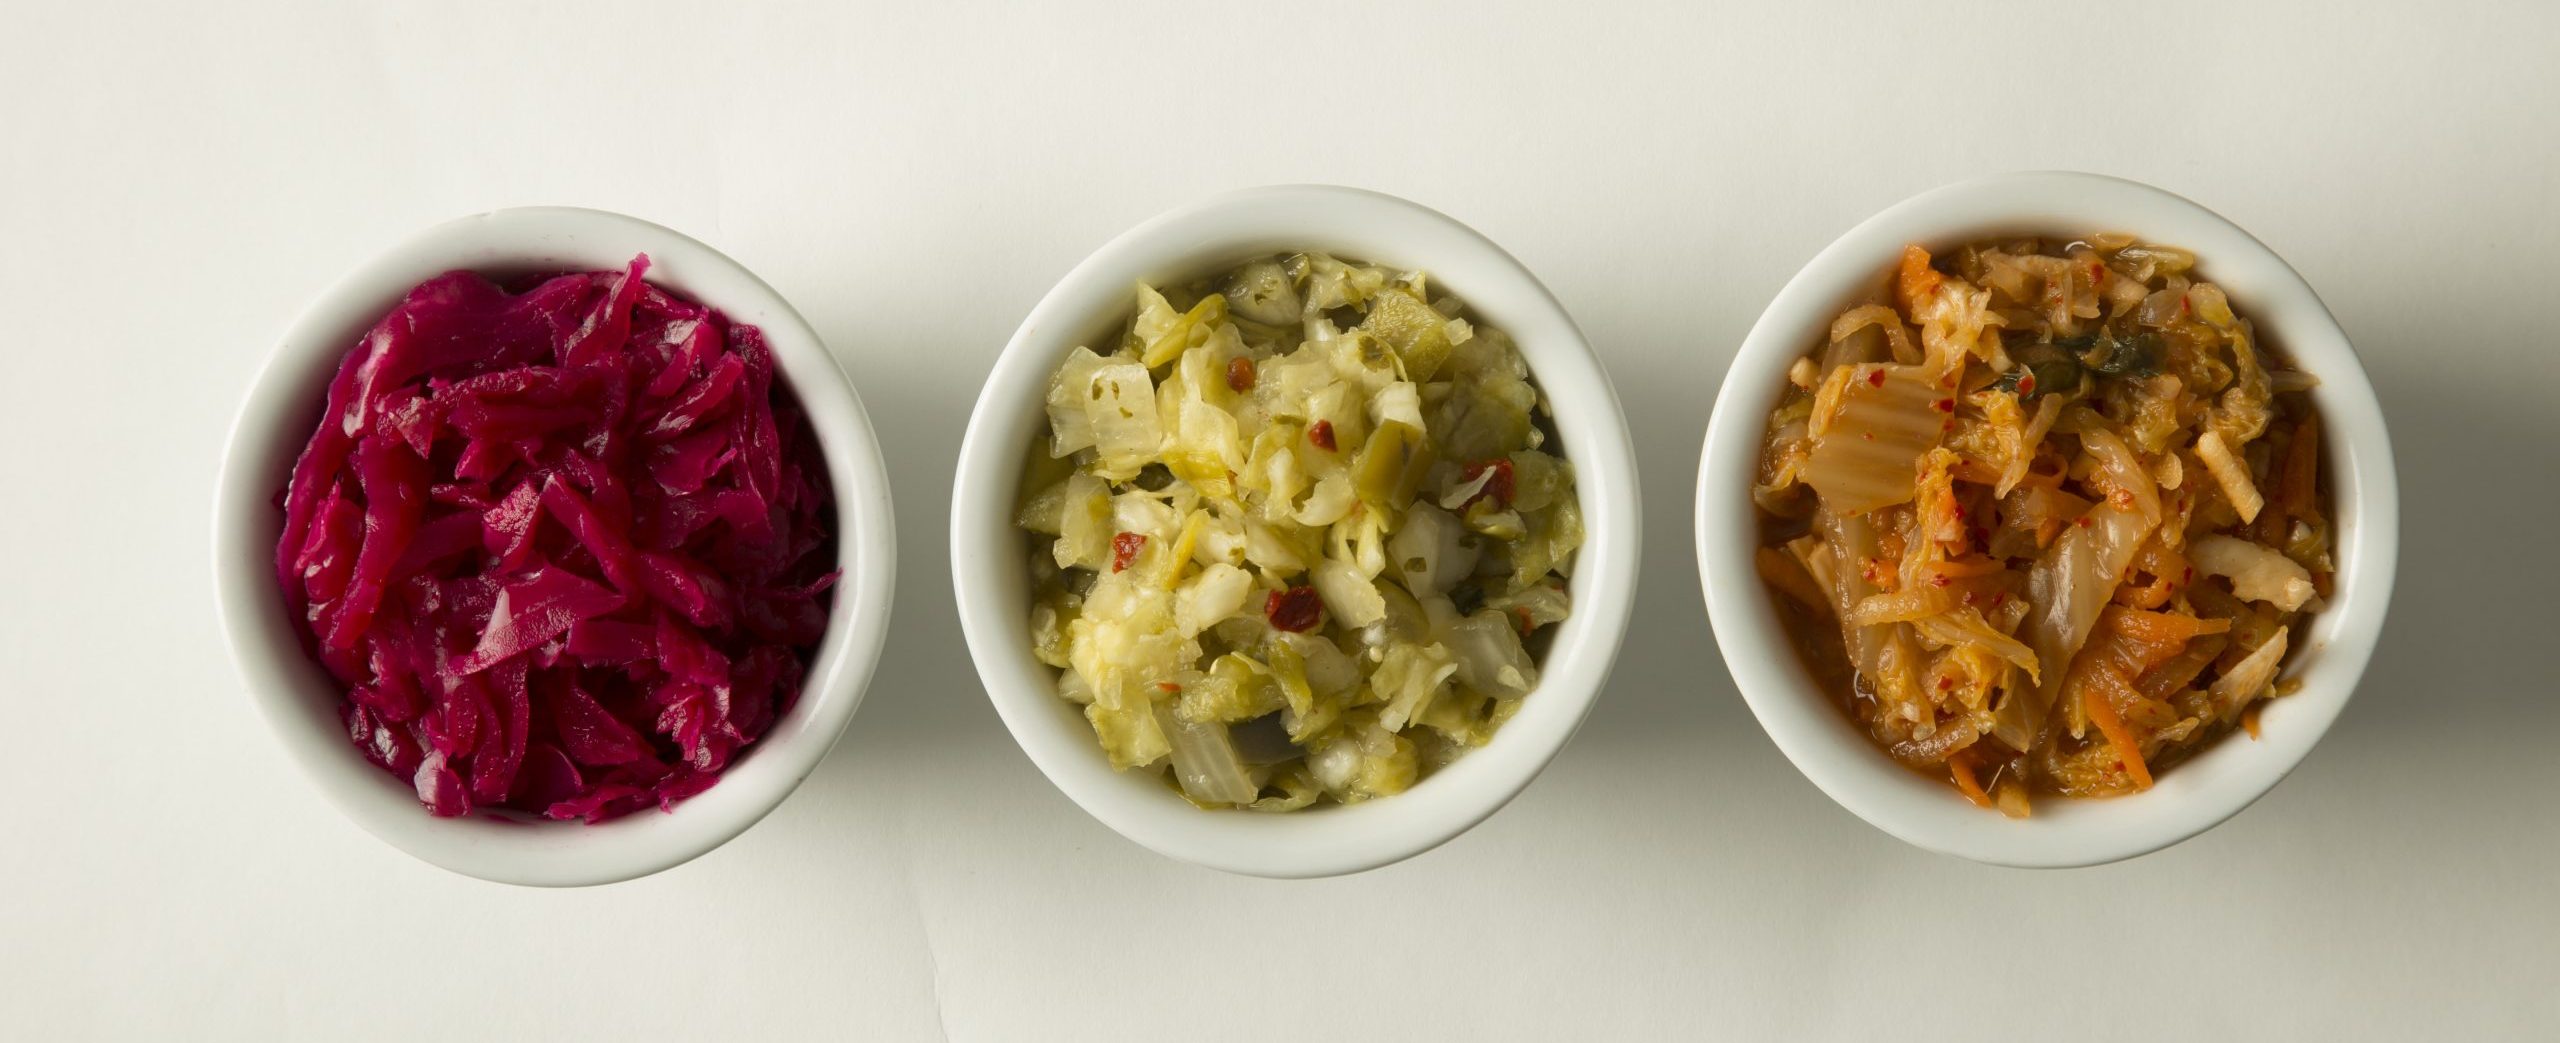 fermented foods line up